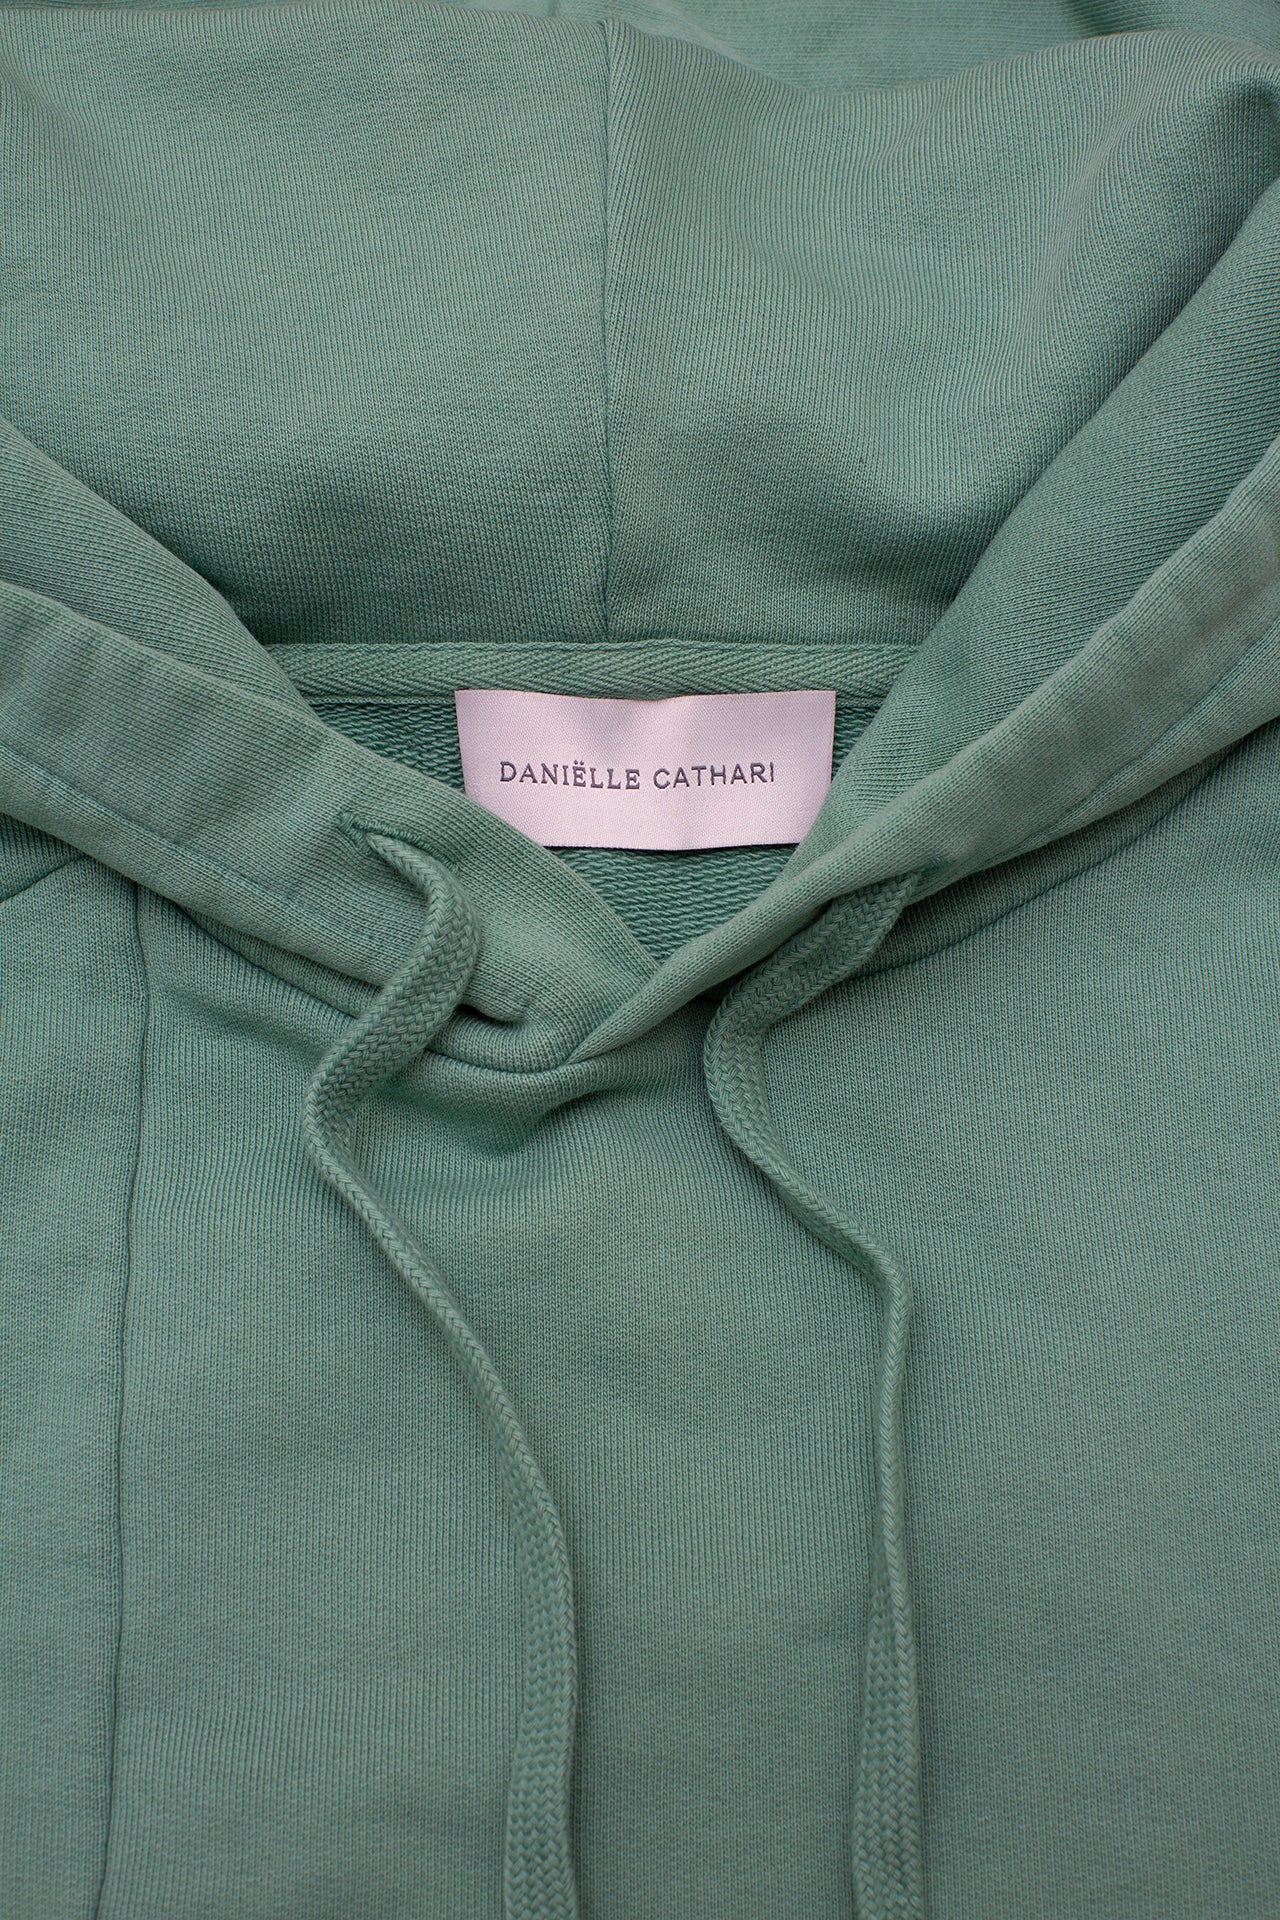 RSF x DC Deconstructed Hoodie Mint - Retrosuperfuture -